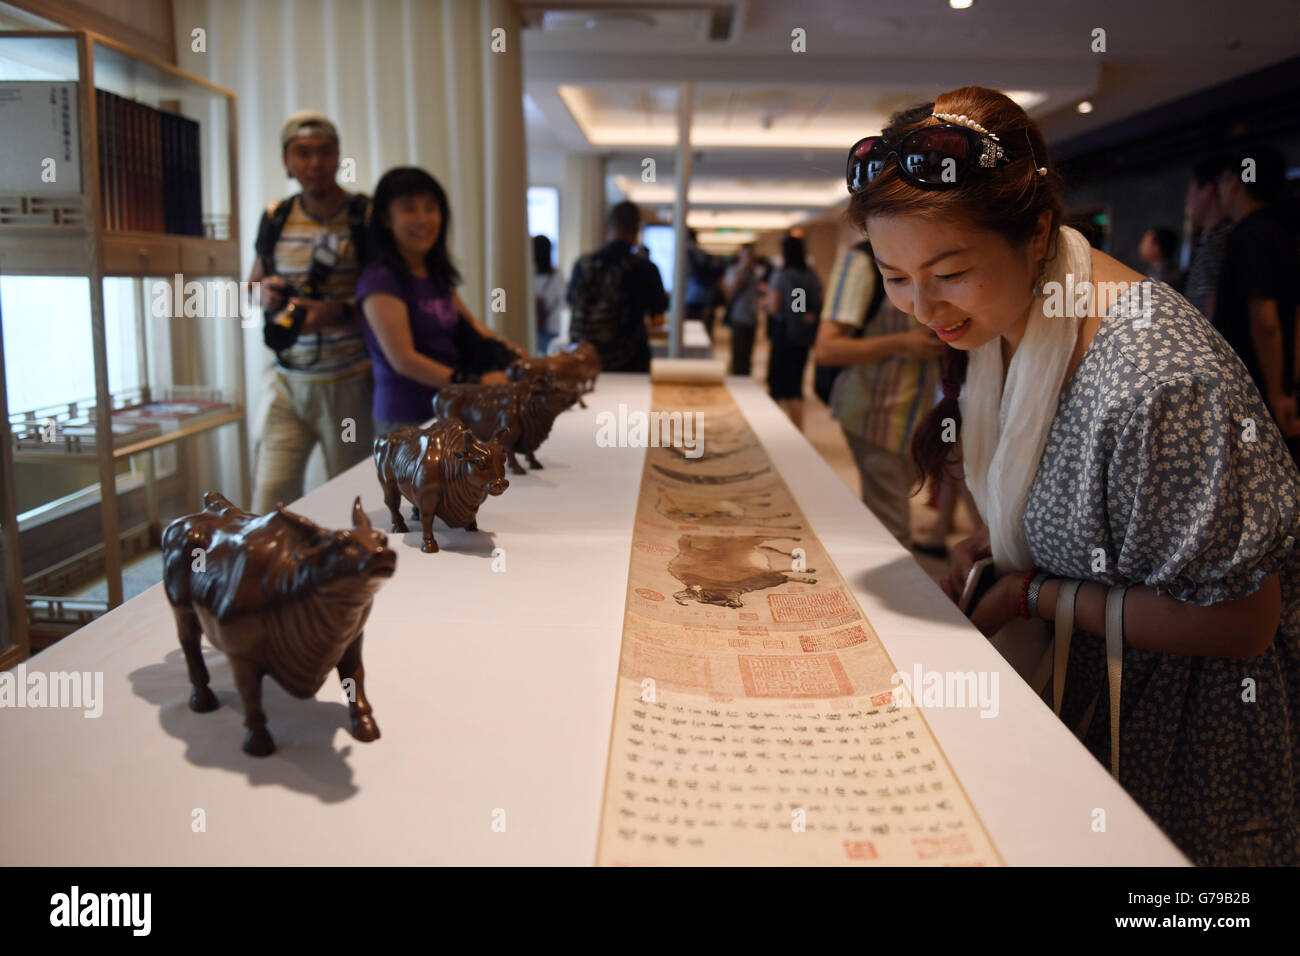 Tianjin. 26th June, 2016. A woman looks at cultural products of the Palace Museum on Royal Caribbean's cruise ship Ovation of the Seas during a cultural activity in north China's Tianjin Municipality, June 26, 2016. © Jin Liangkuai/Xinhua/Alamy Live News Stock Photo